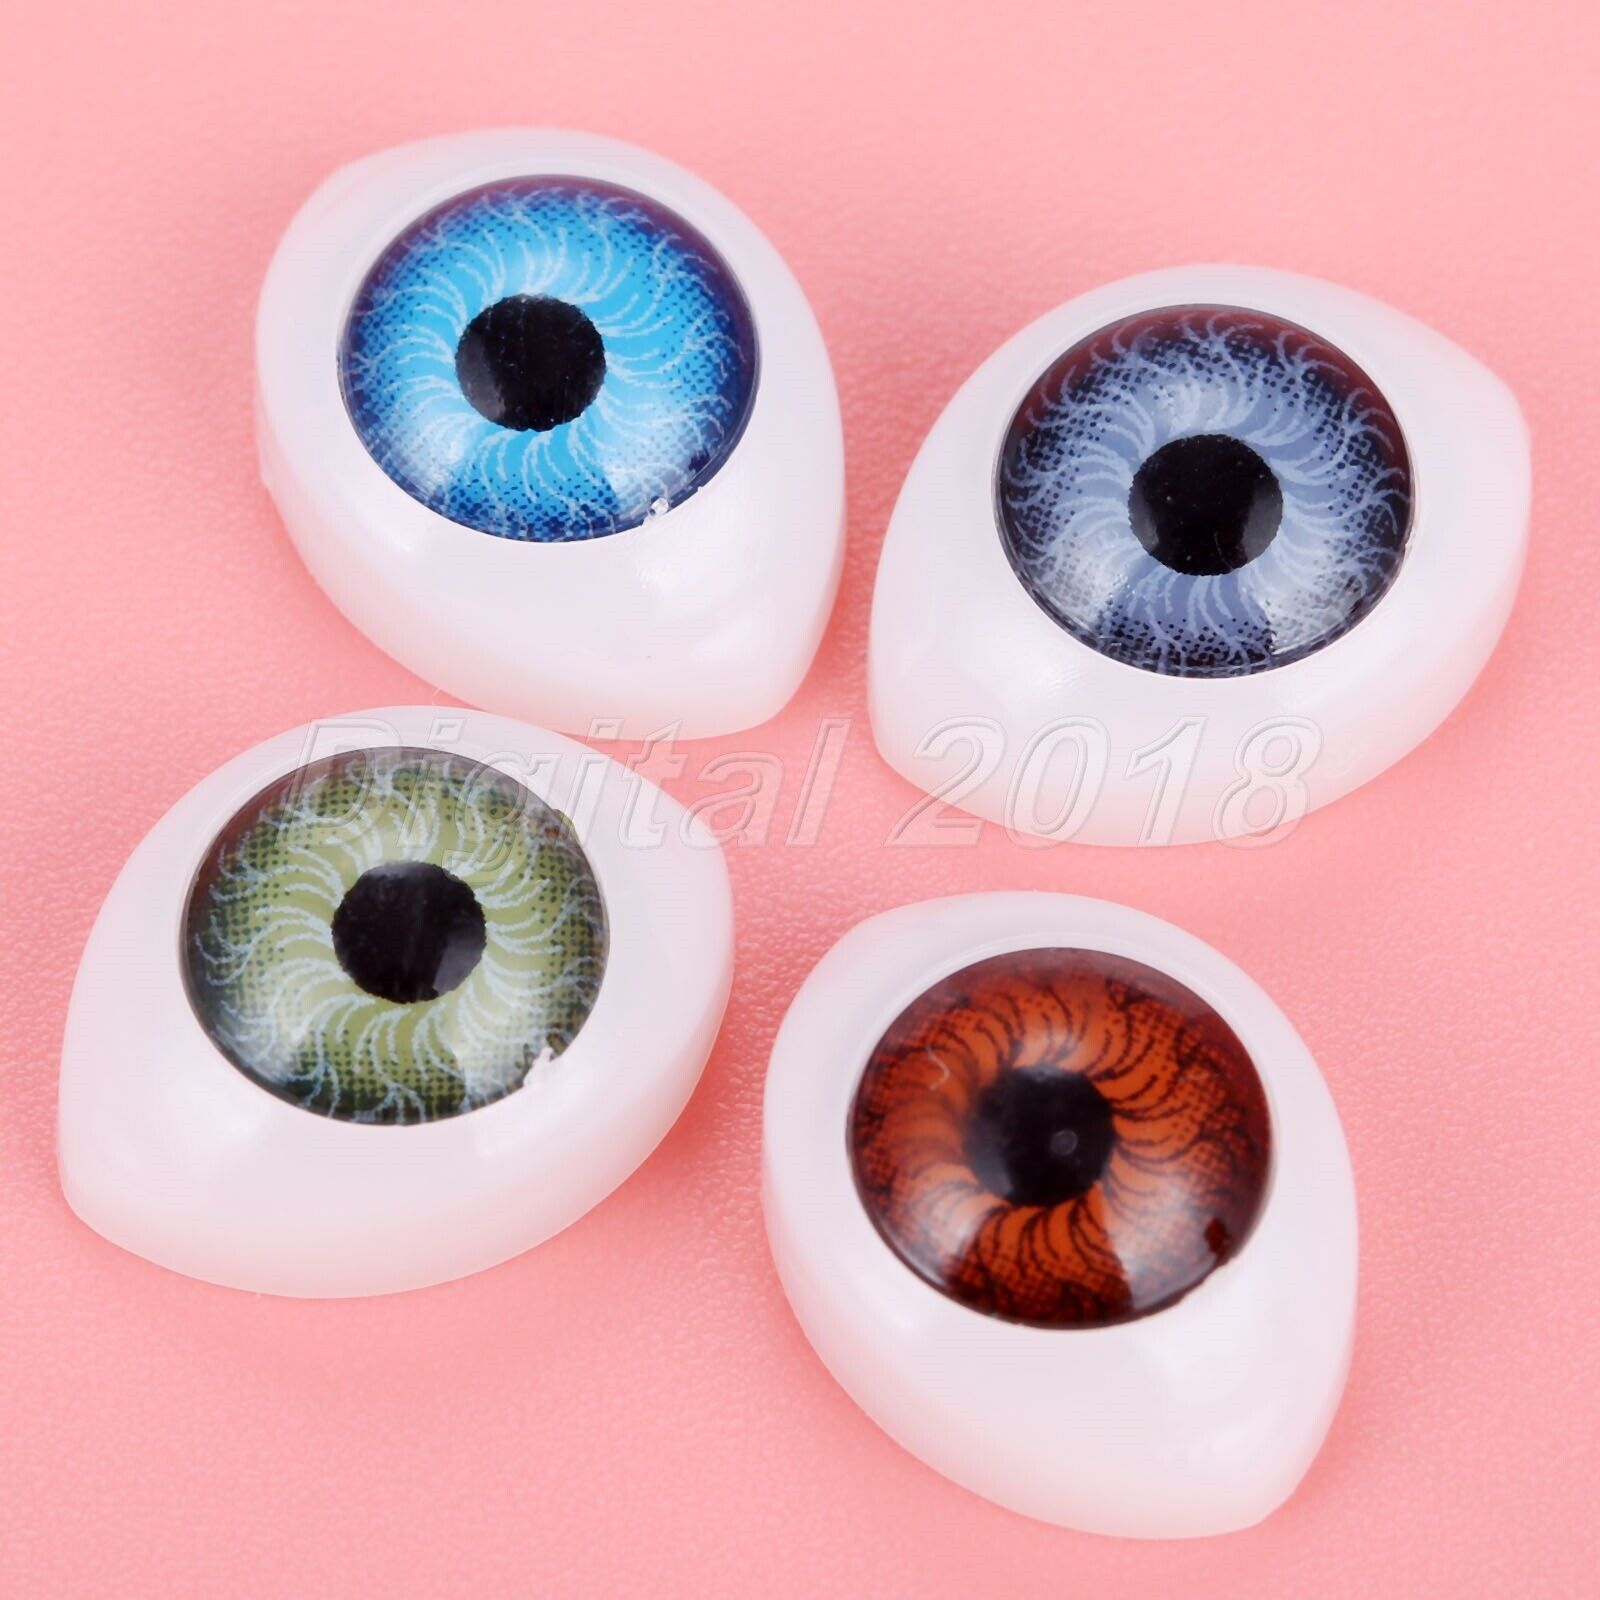 100Pcs 0.47"*0.63" Safety Doll Eyes Toys For Doll Making Eyes Doll Accessories Unbranded Does Not Apply - фотография #11